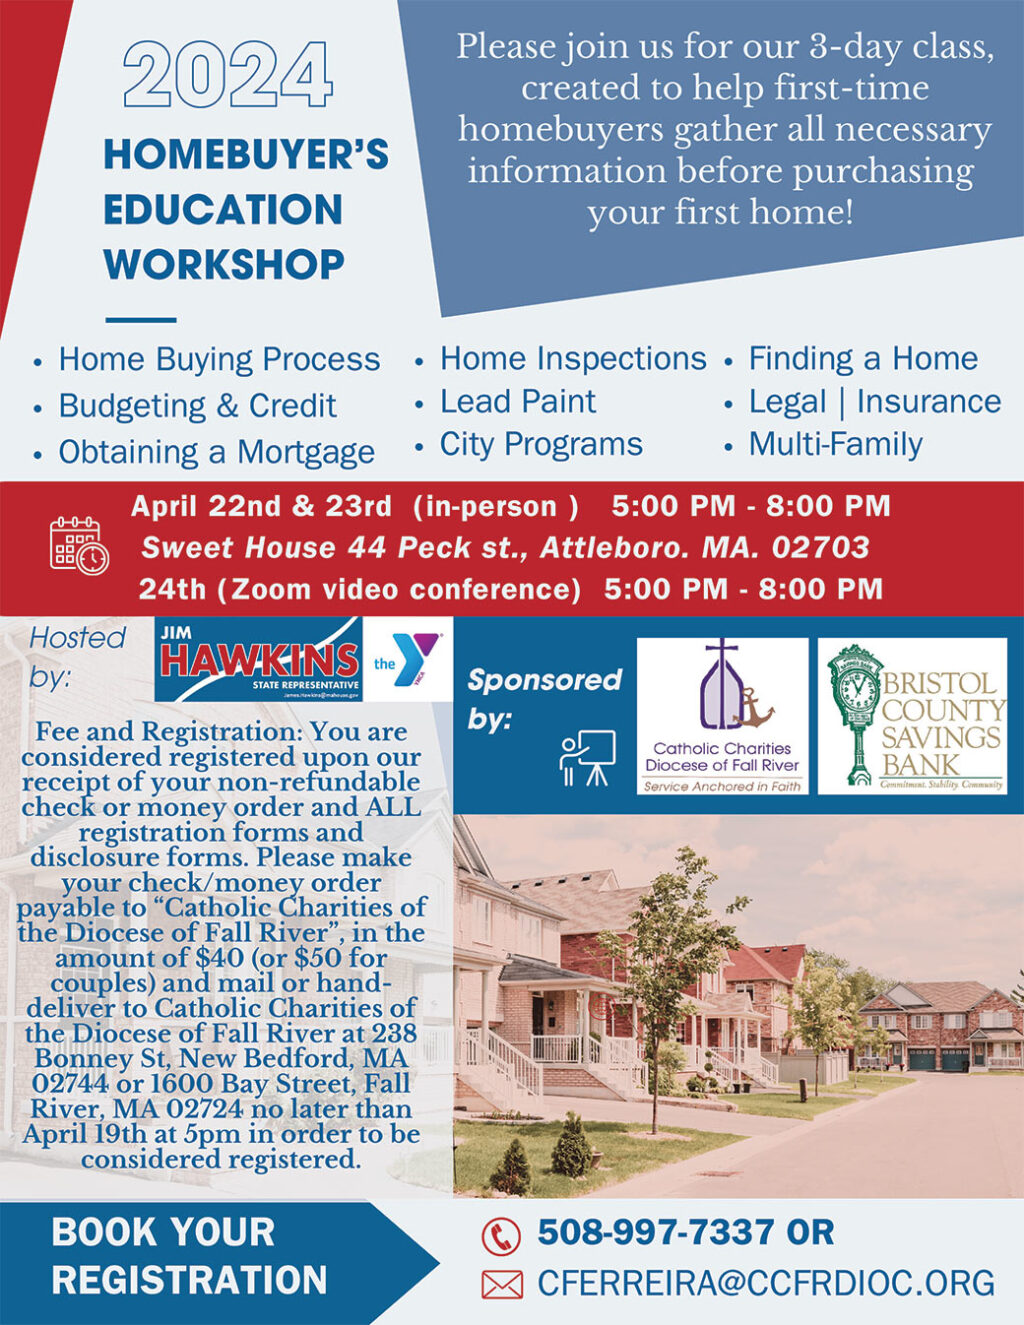 3-Day Class Homebuyers Education Workshop April 22 & 23 in-person and April via Zoom